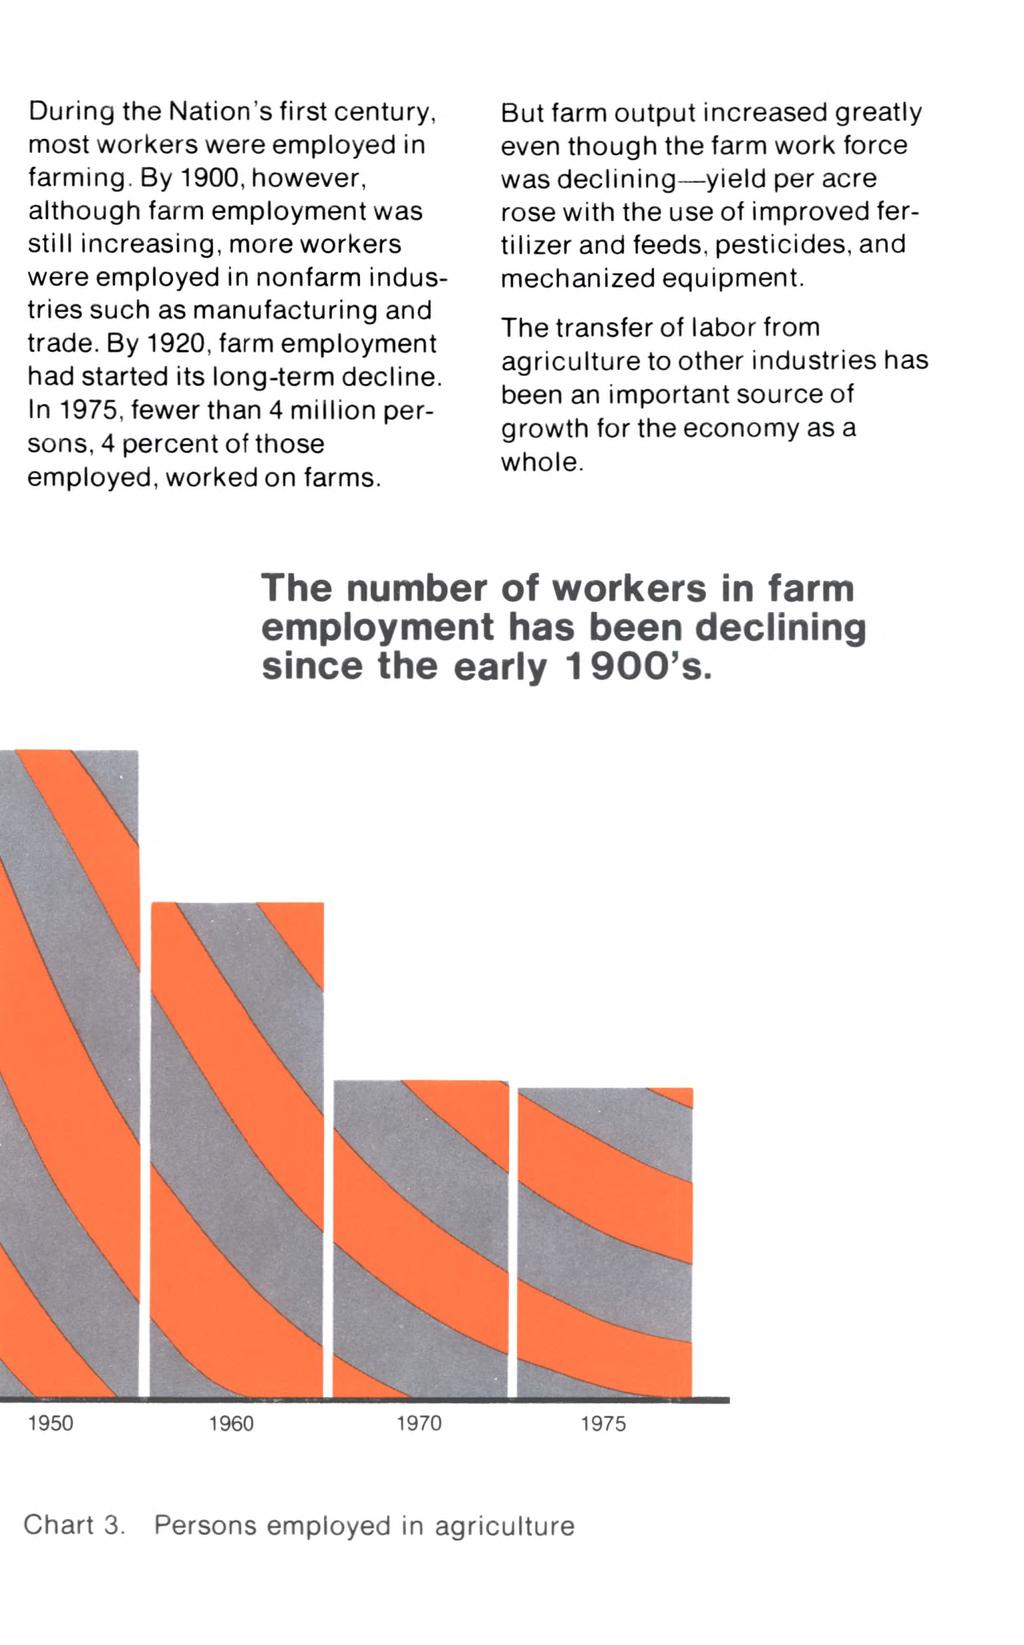 During the Nation s first century, most workers were employed in farming.